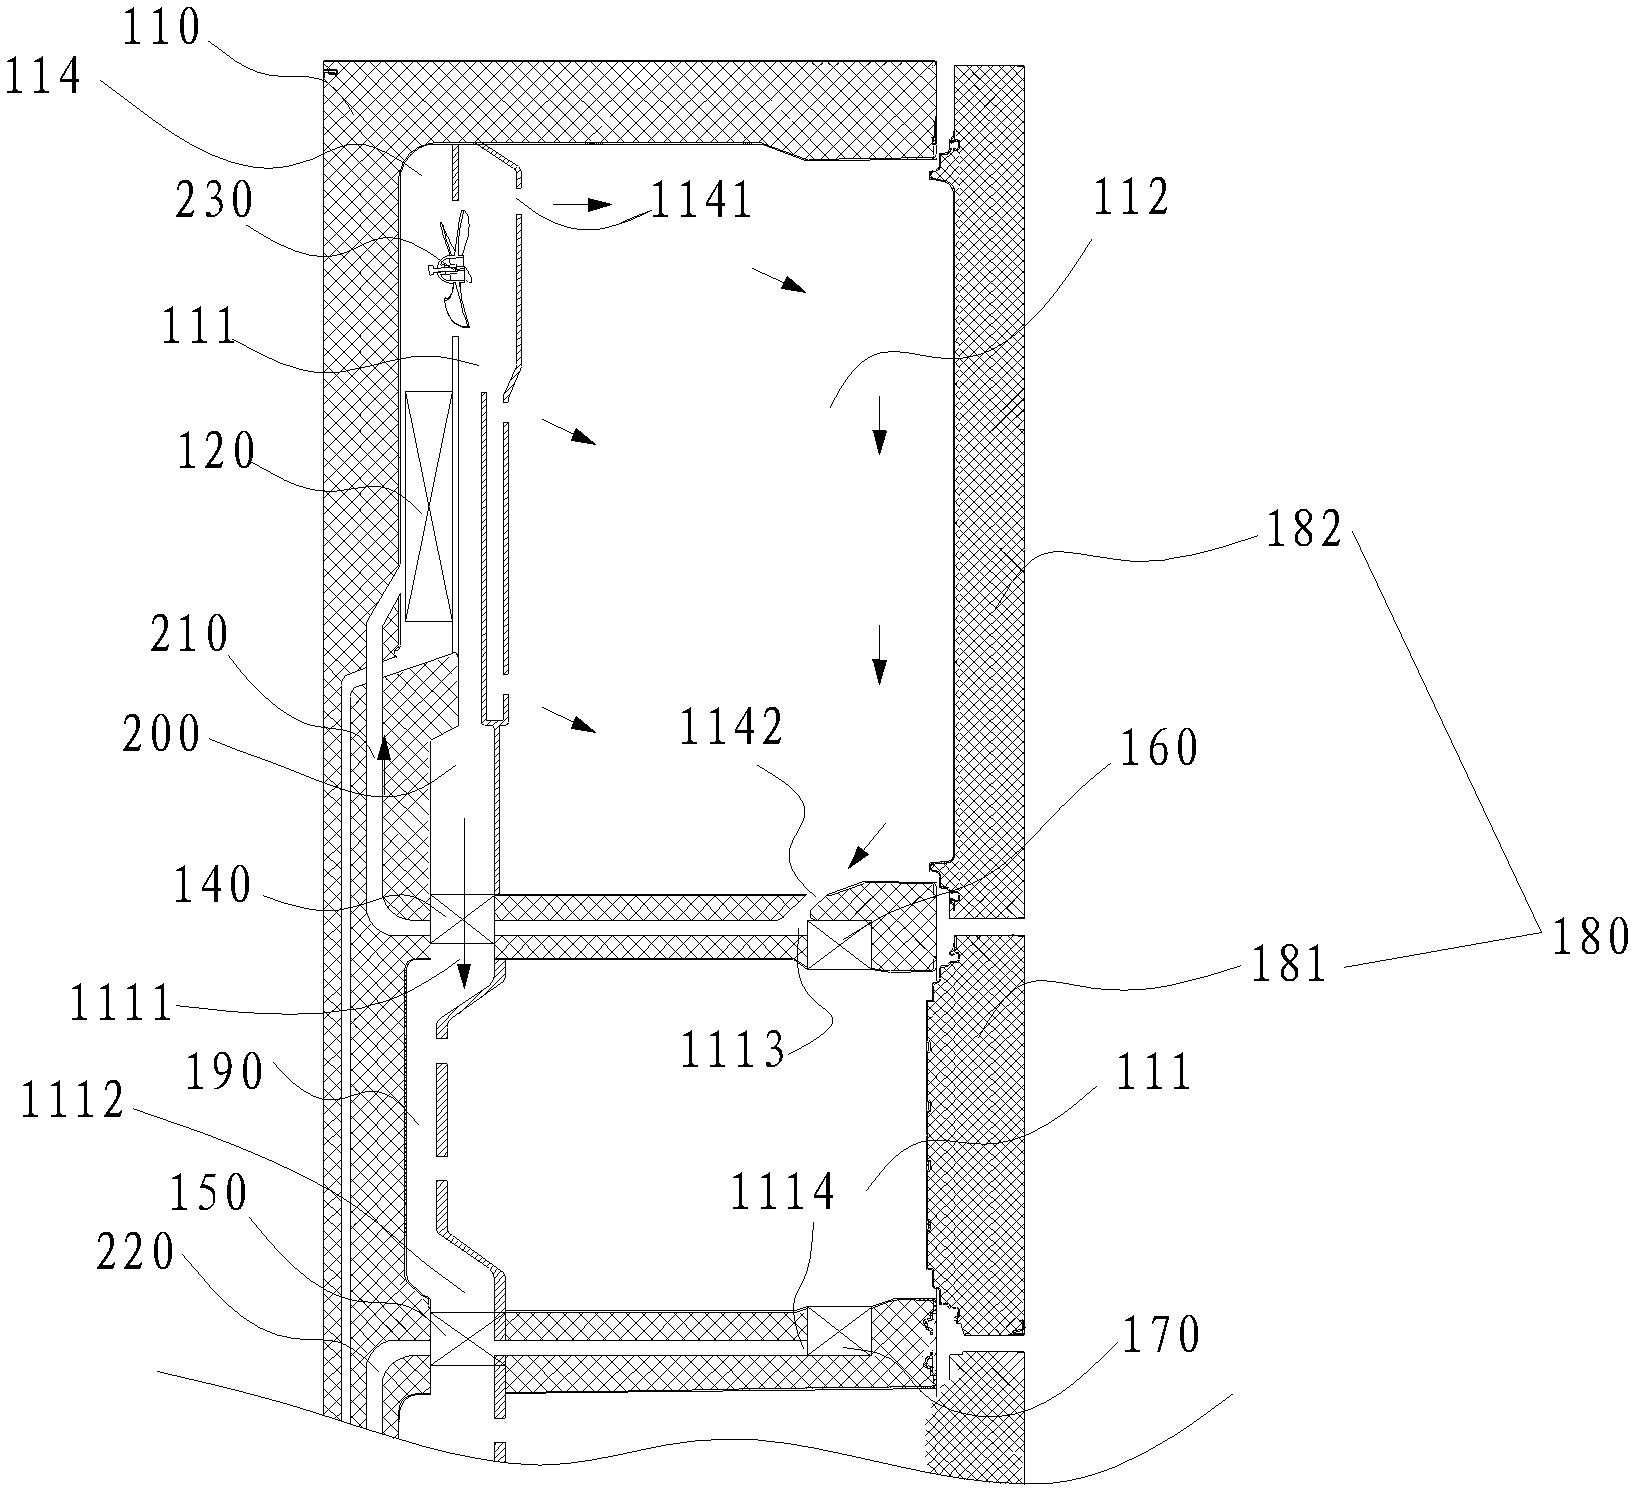 Method for controlling refrigerator